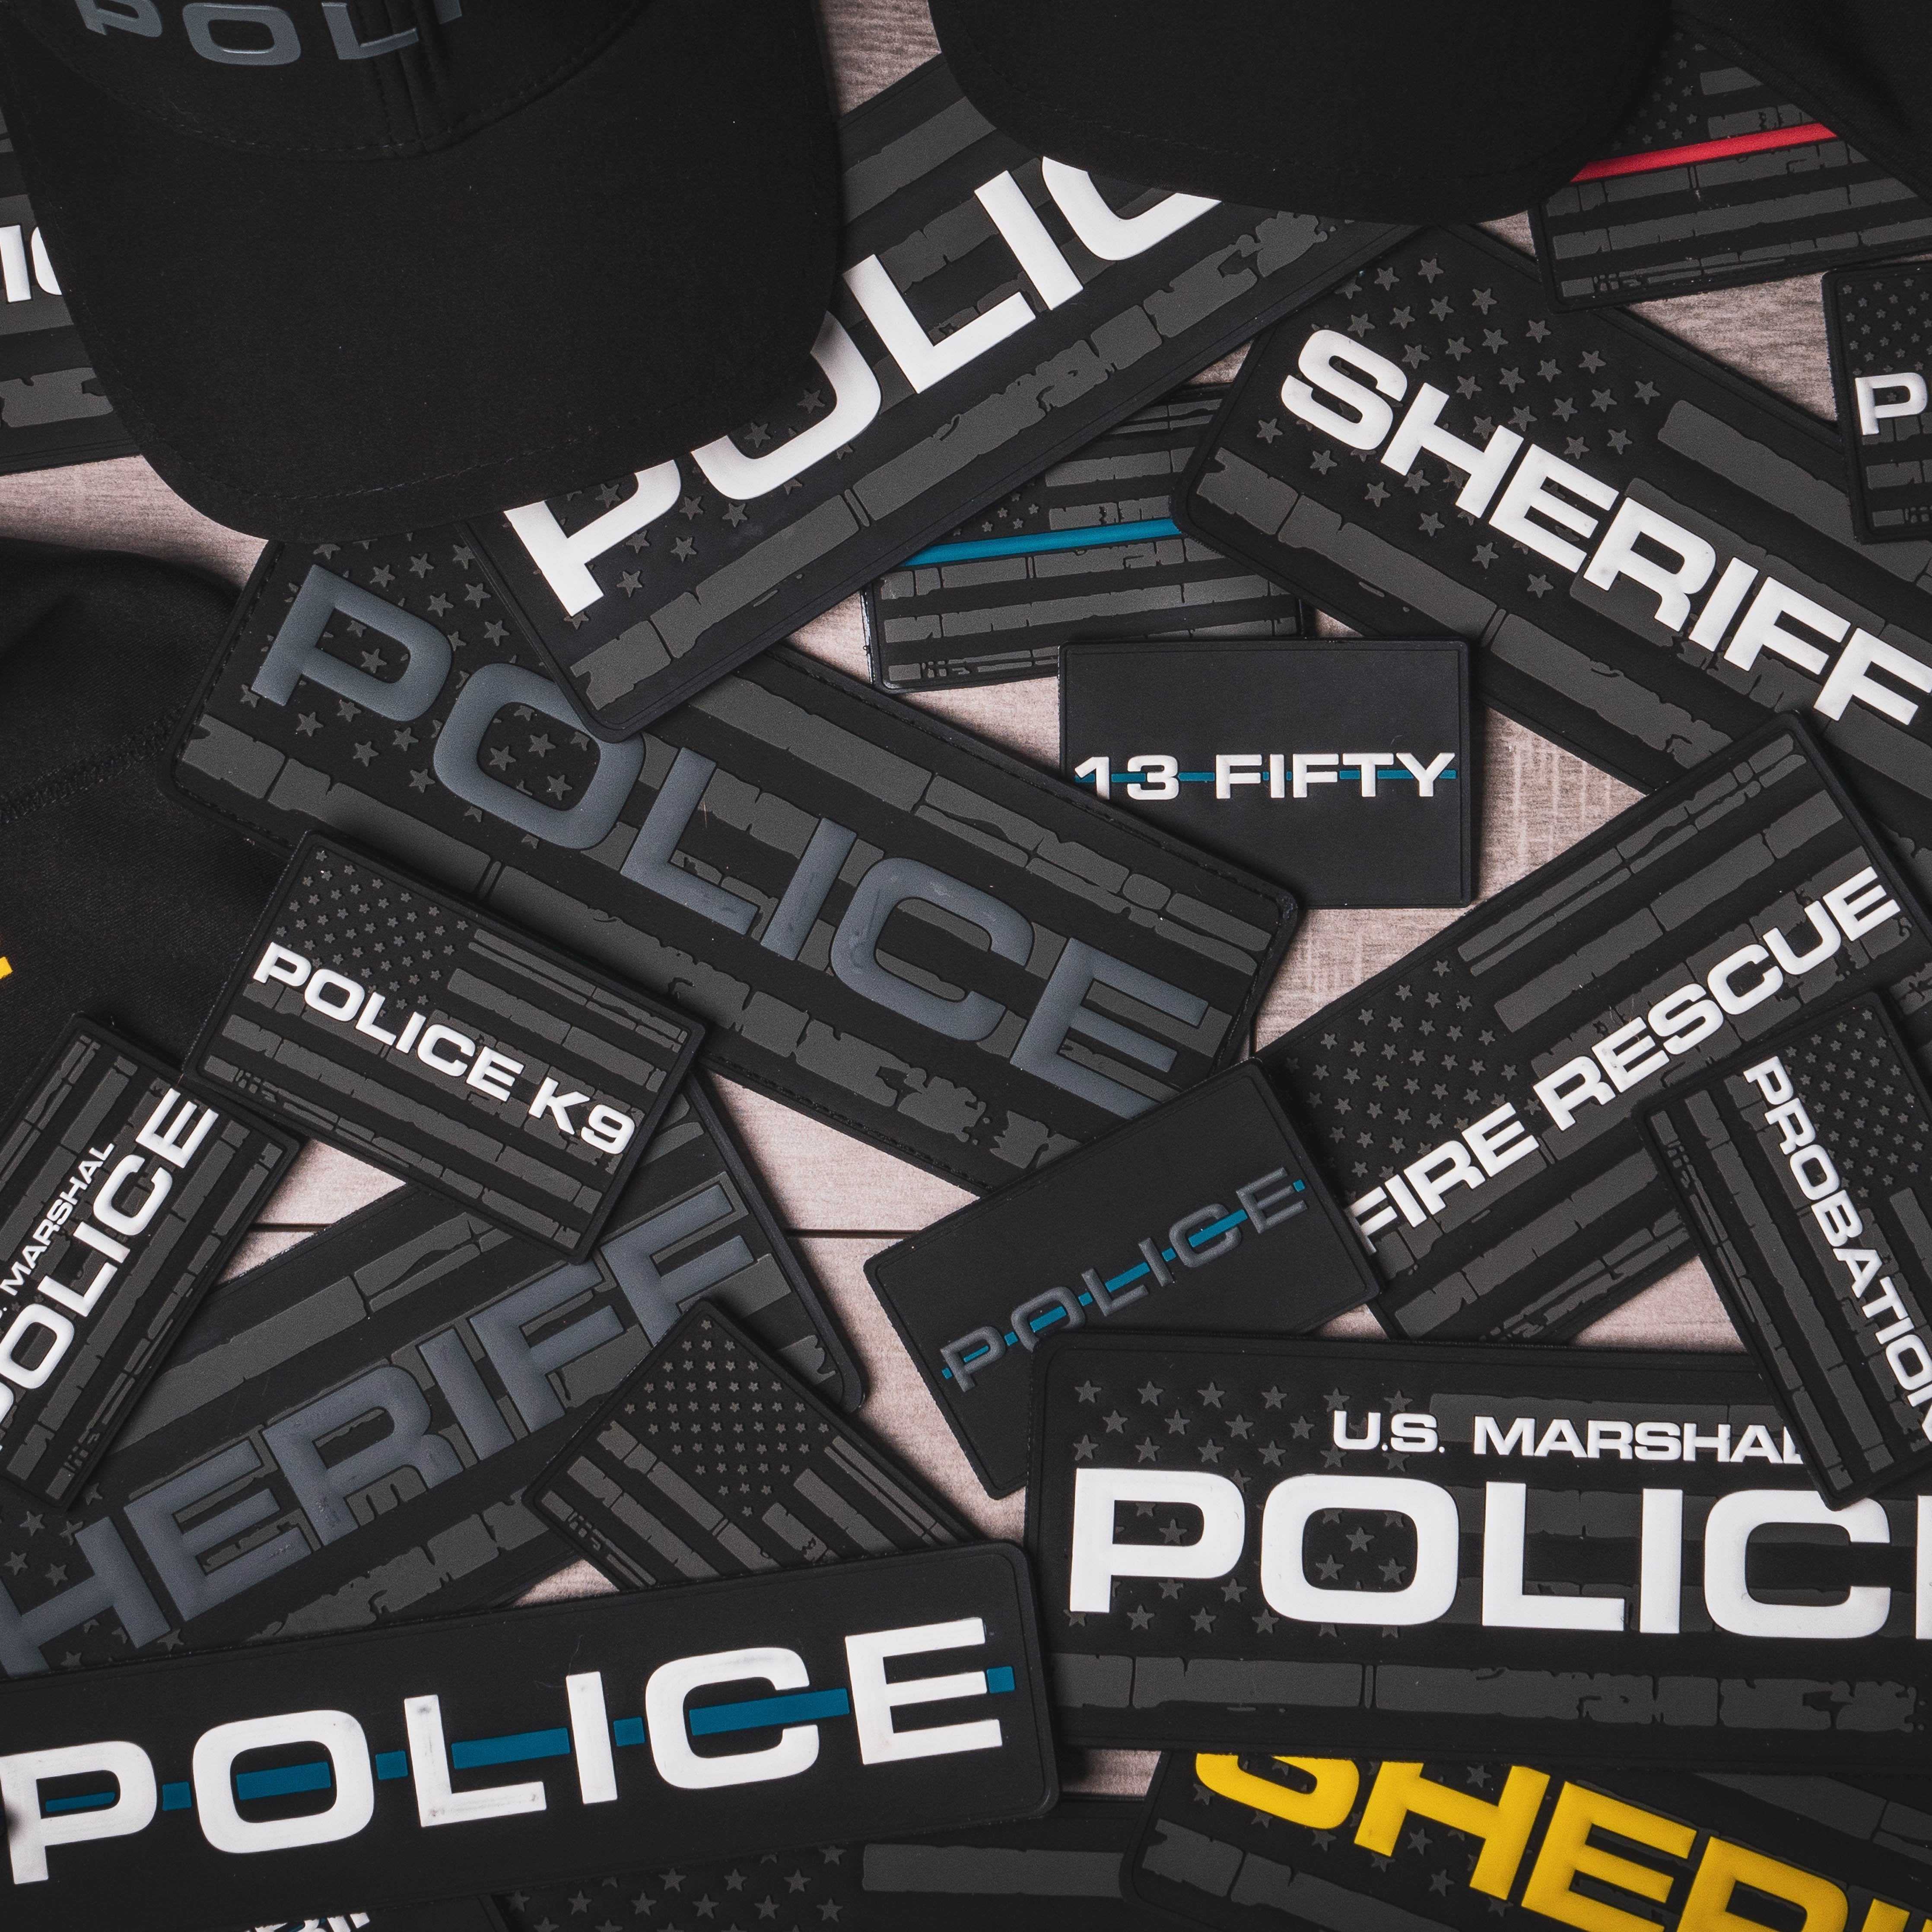 Buy PVC Police Patches for Sale at Best Price